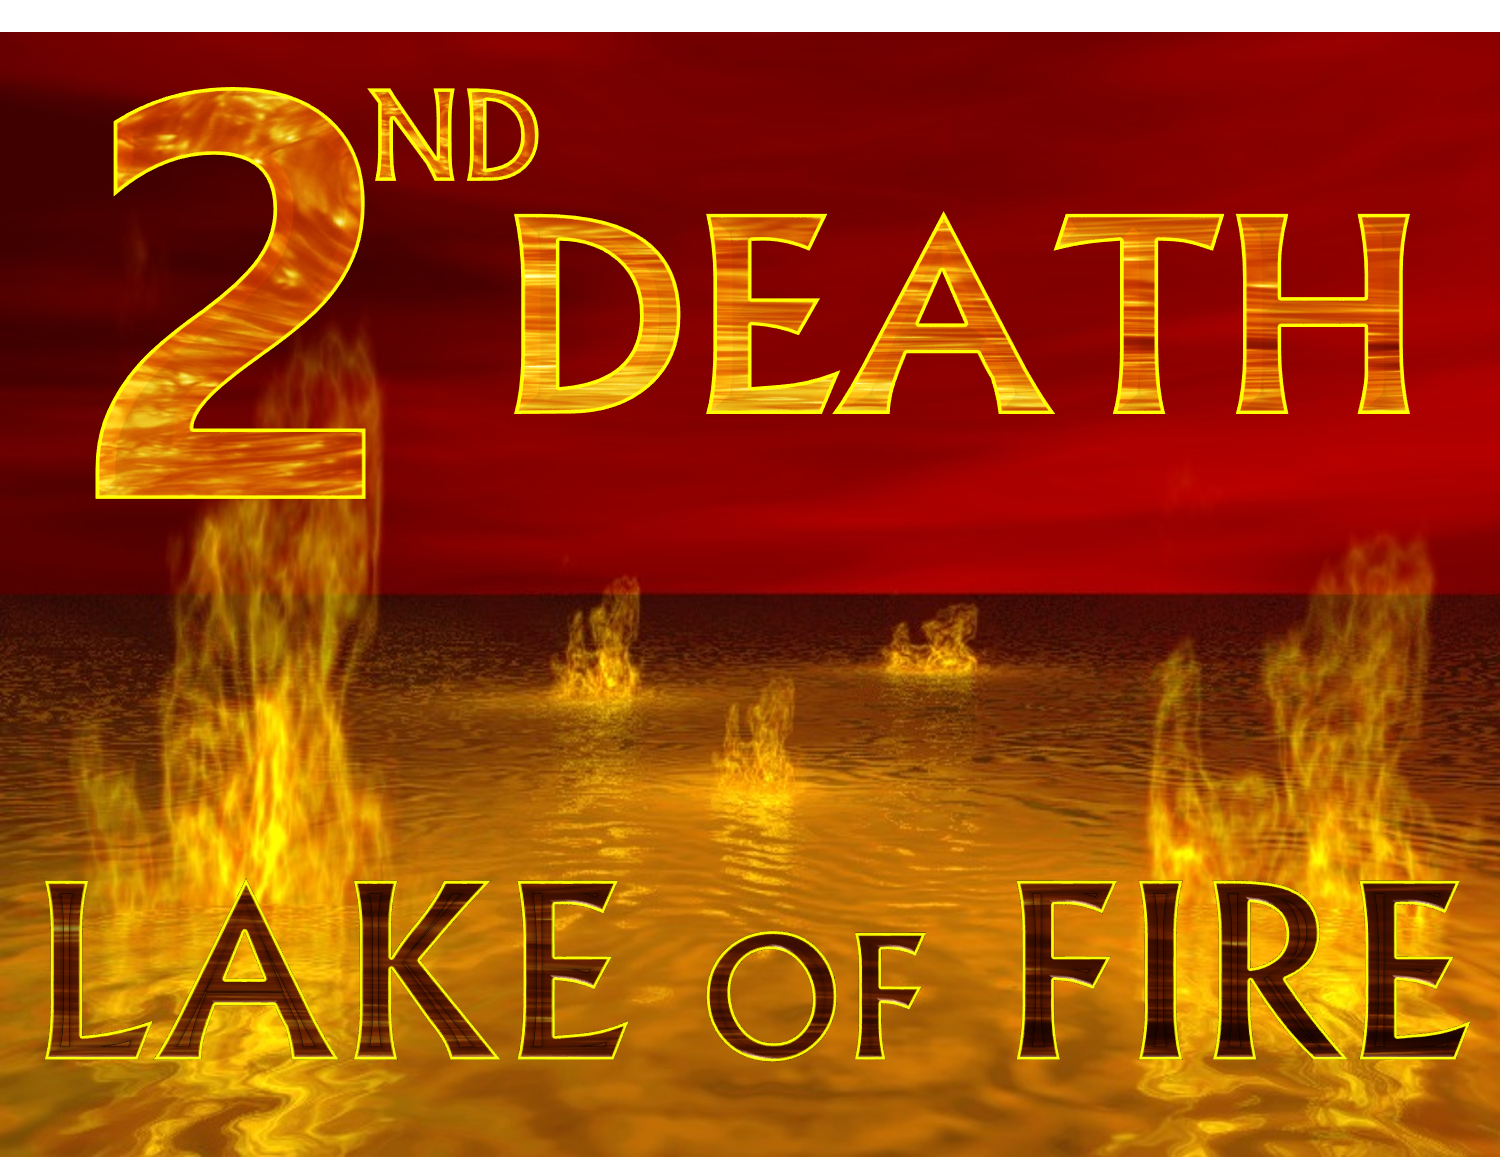 2nd DEATH" LAKE OF FIRE